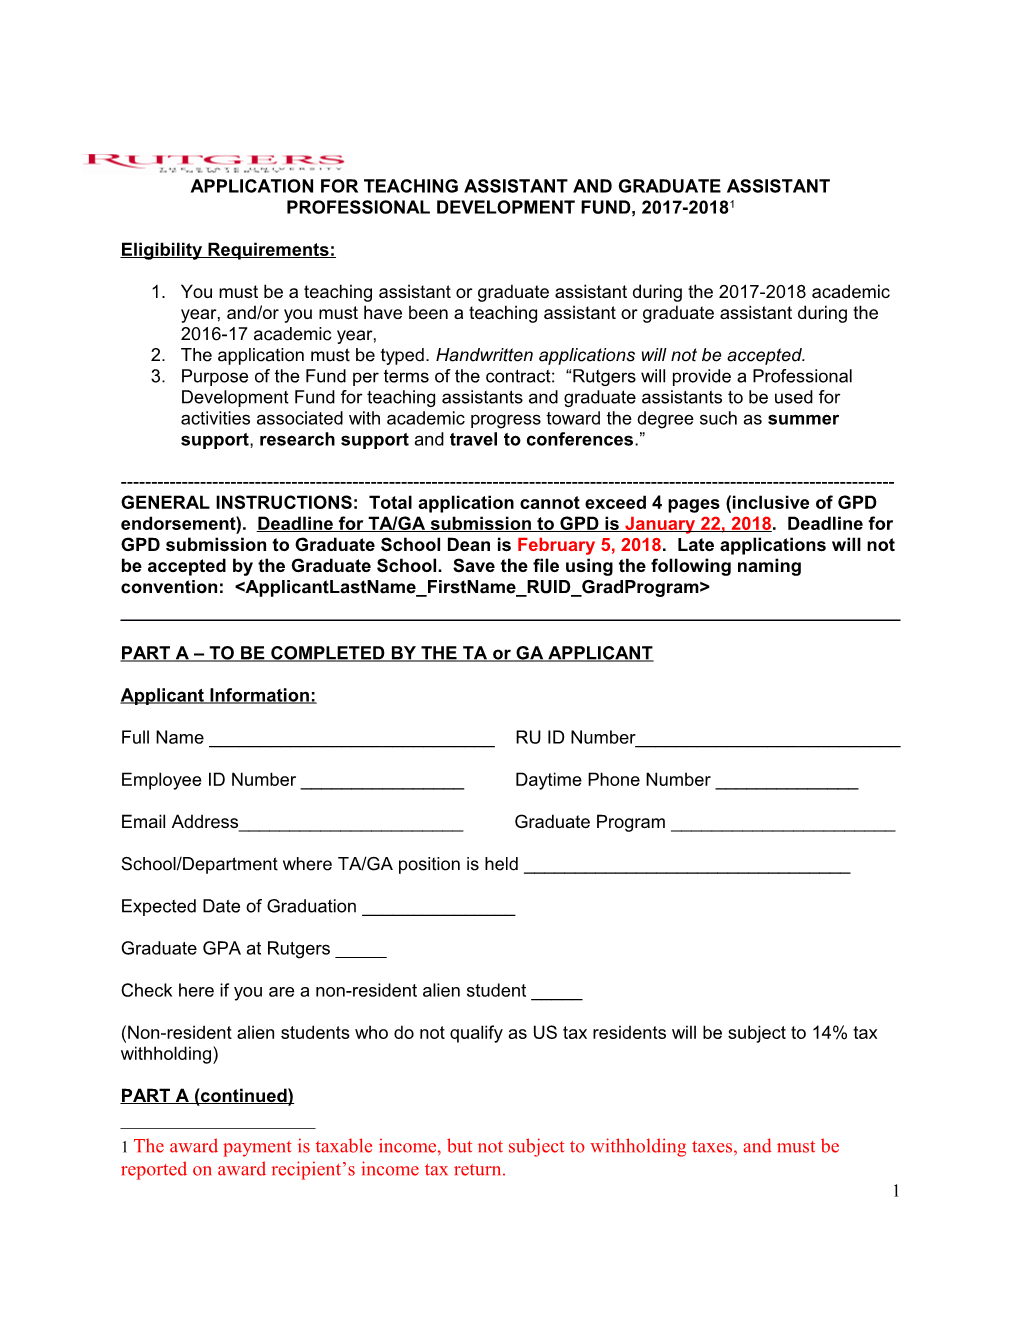 Application for Teaching Assistant and Graduate Assistant Professional Development Fund